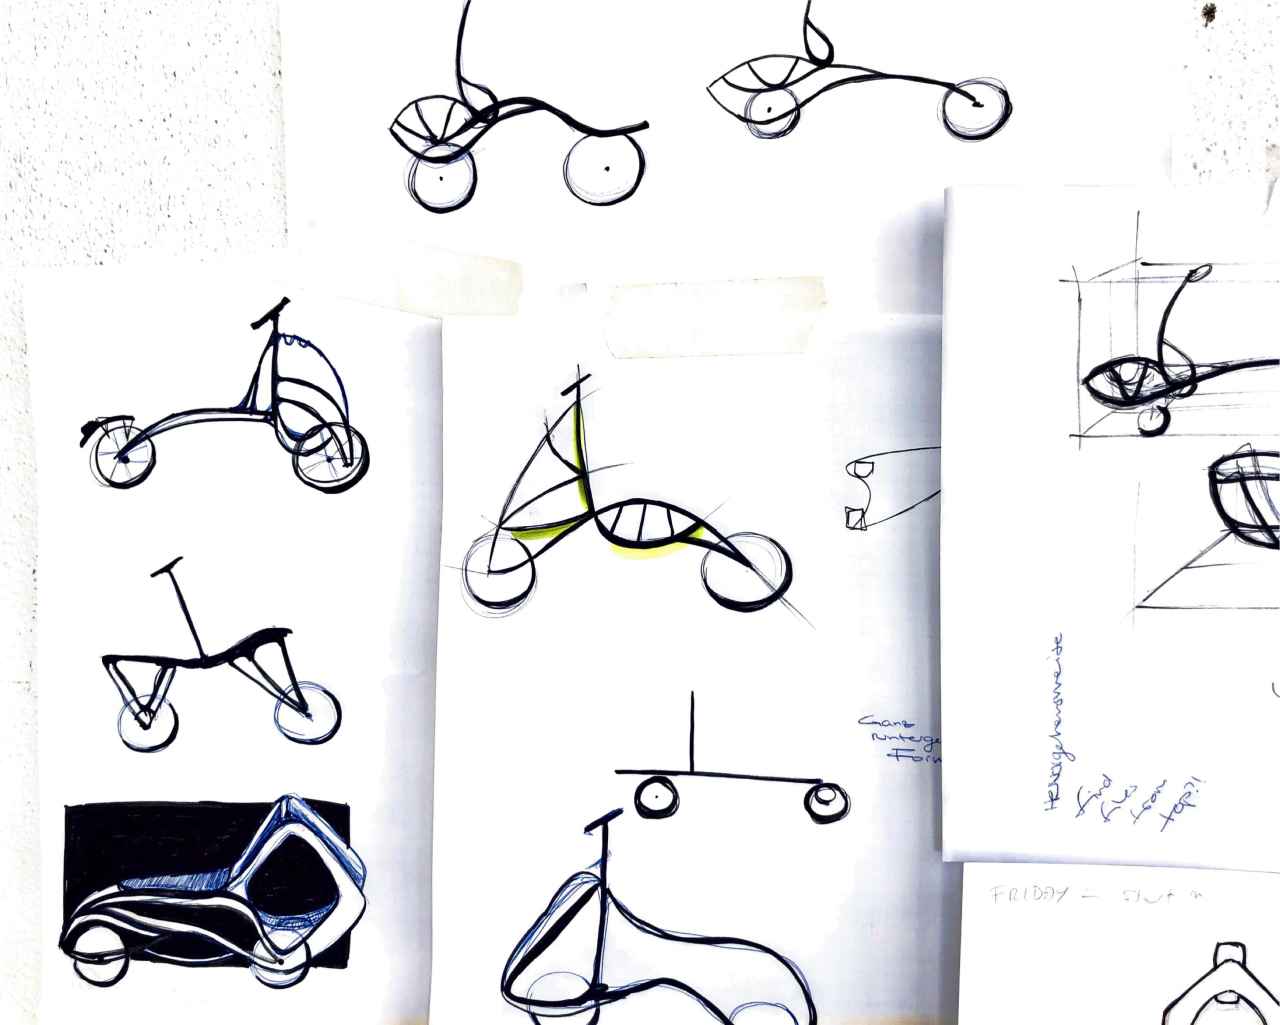 various sketches of vehicles